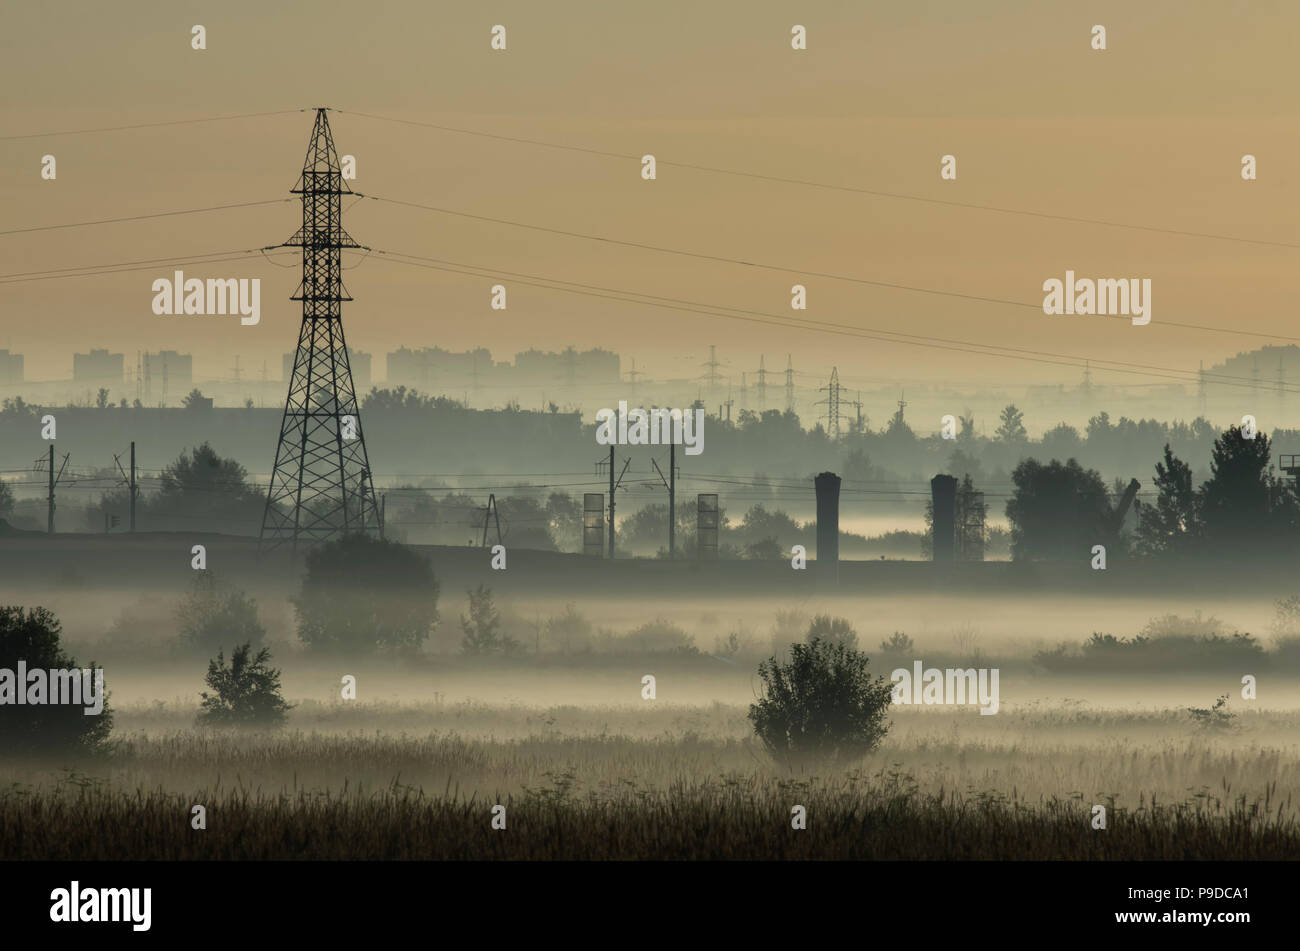 Fog over fields and tower of power lines on the outskirts of the city on the background of power lines Stock Photo